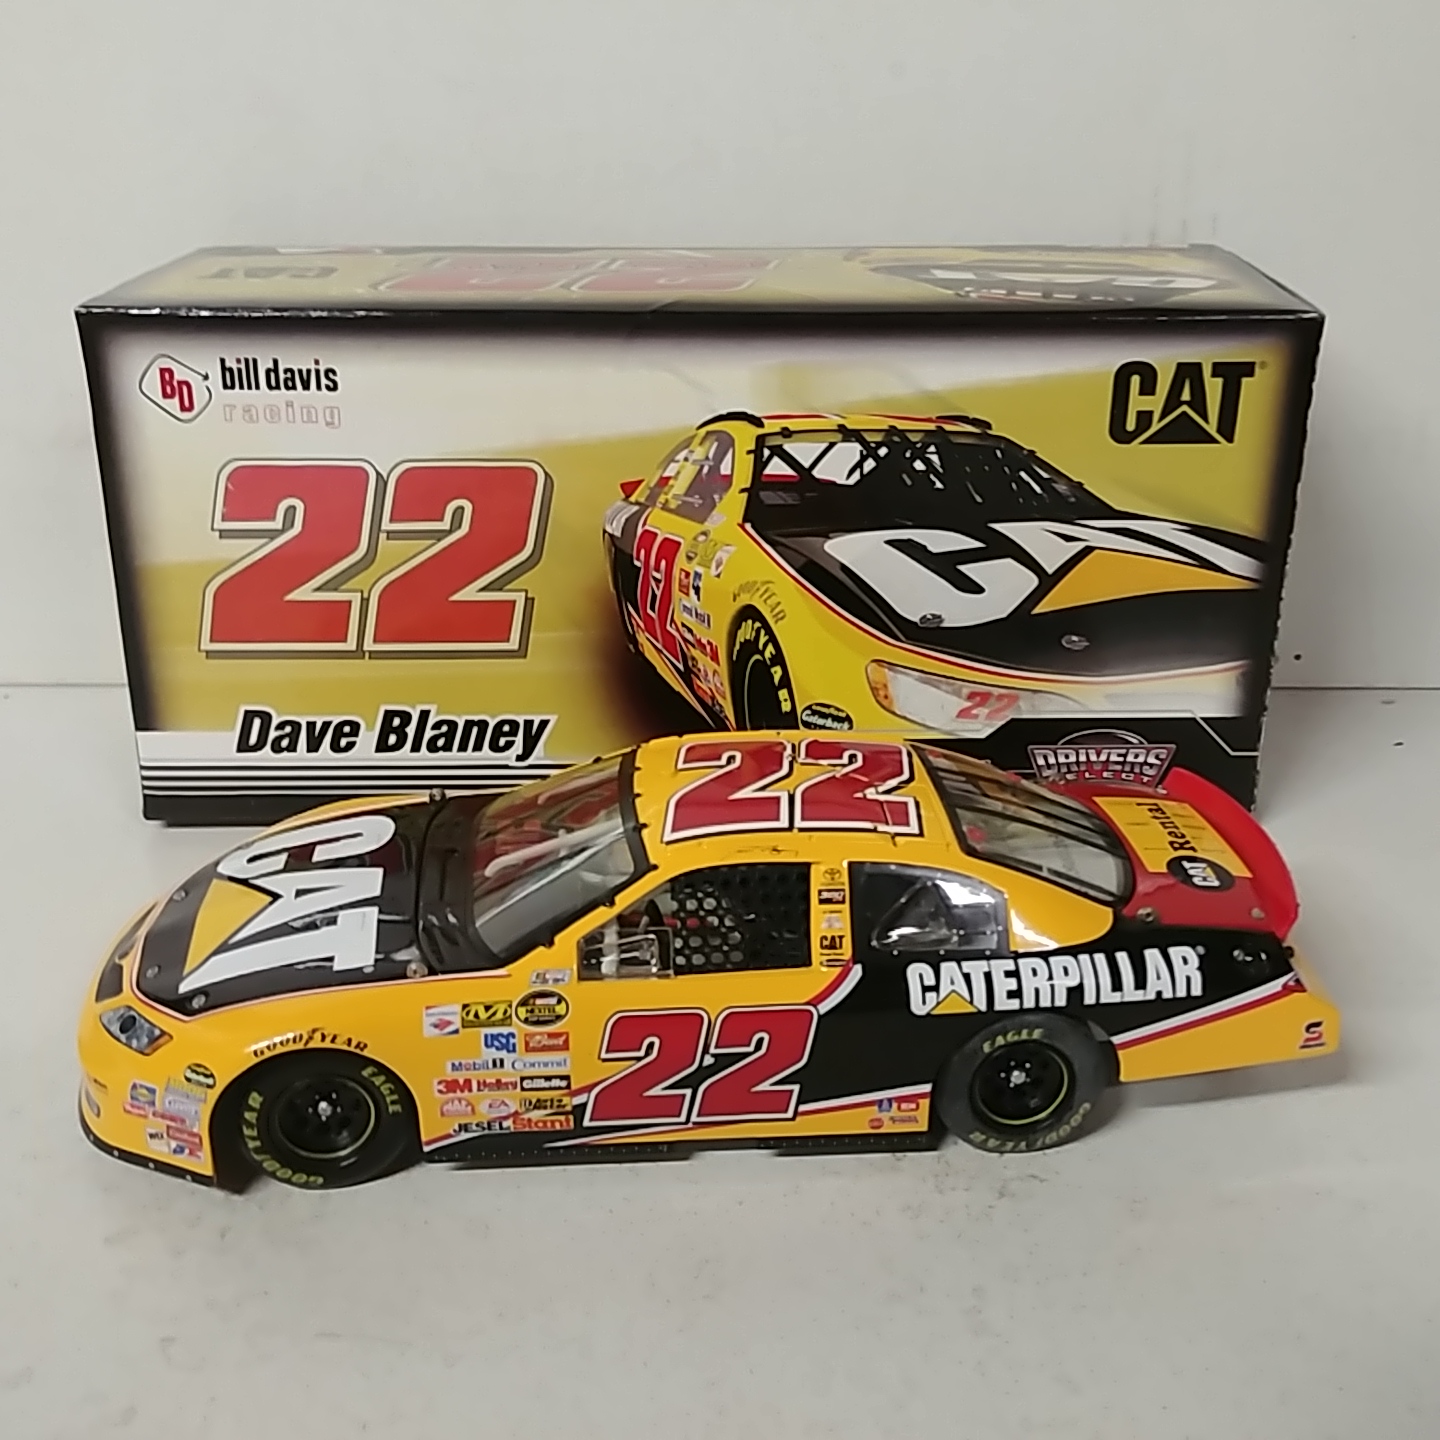 2007 Dave Blaney 1/24th Caterpillar Toyota Camry